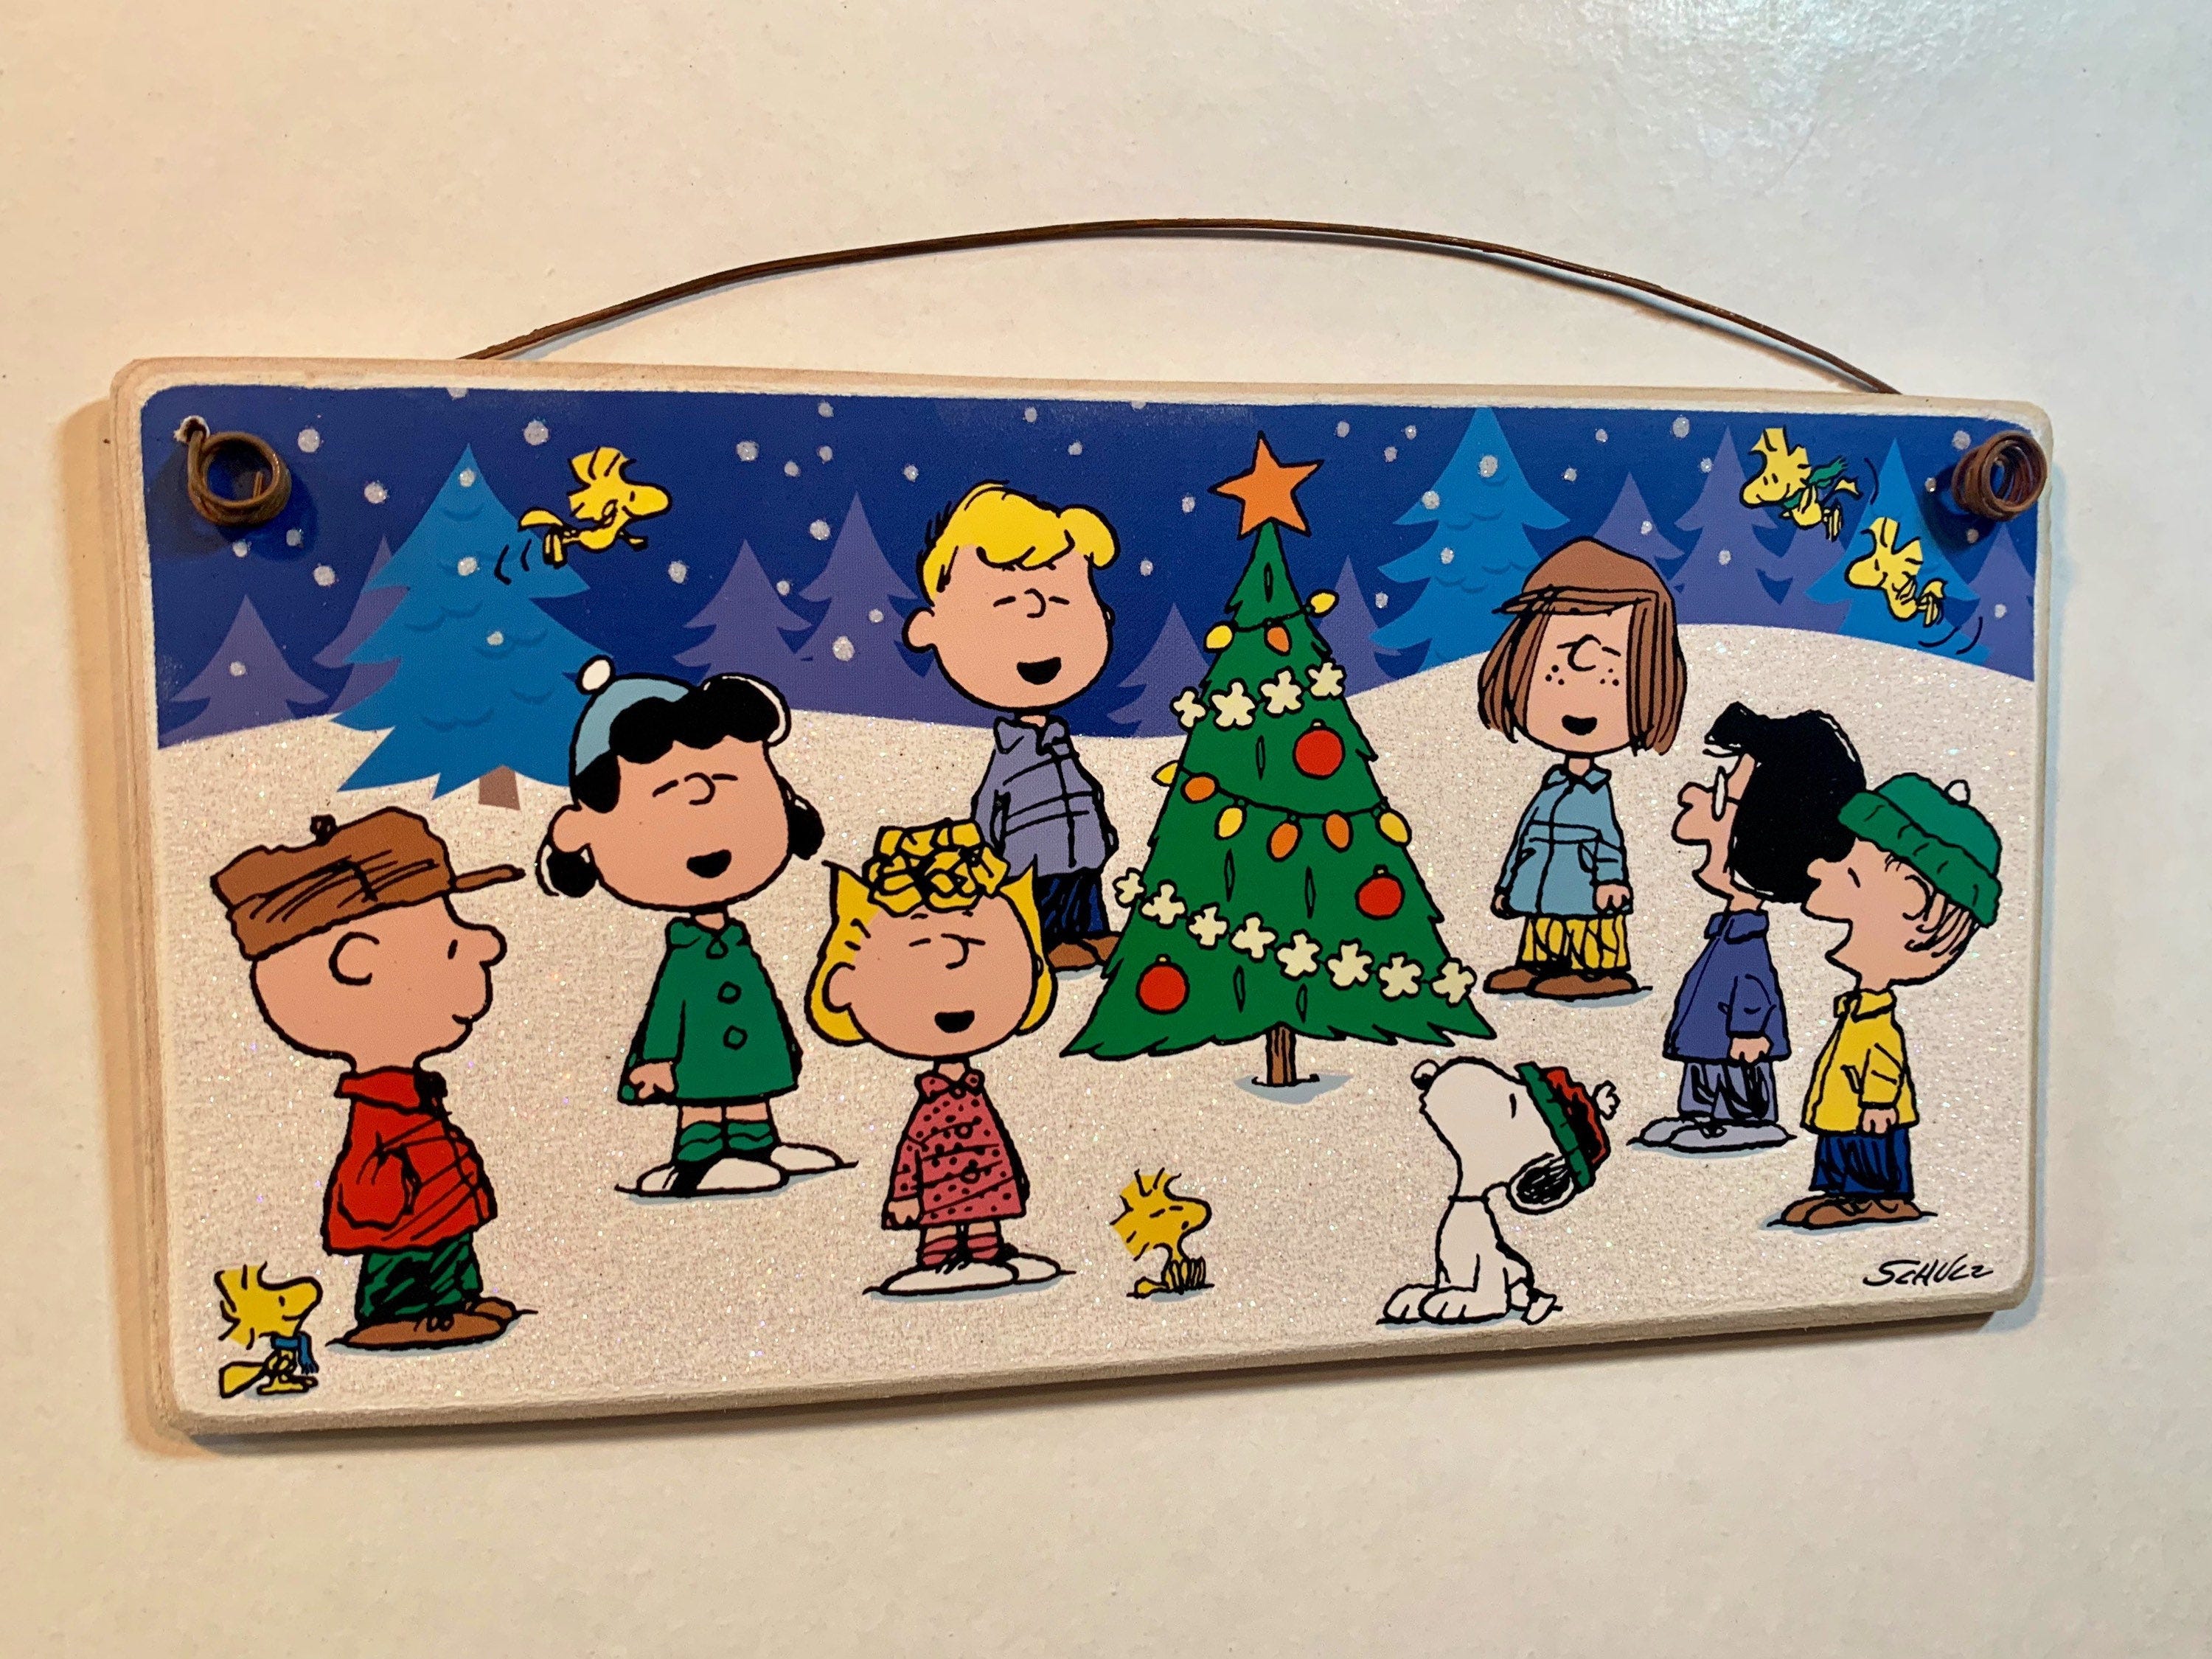 Charlie Brown And The Peanuts Gang / Beautiful Sparkling Glitter/ 8x4 / Wood Sign / Greeting Cards Available Too!